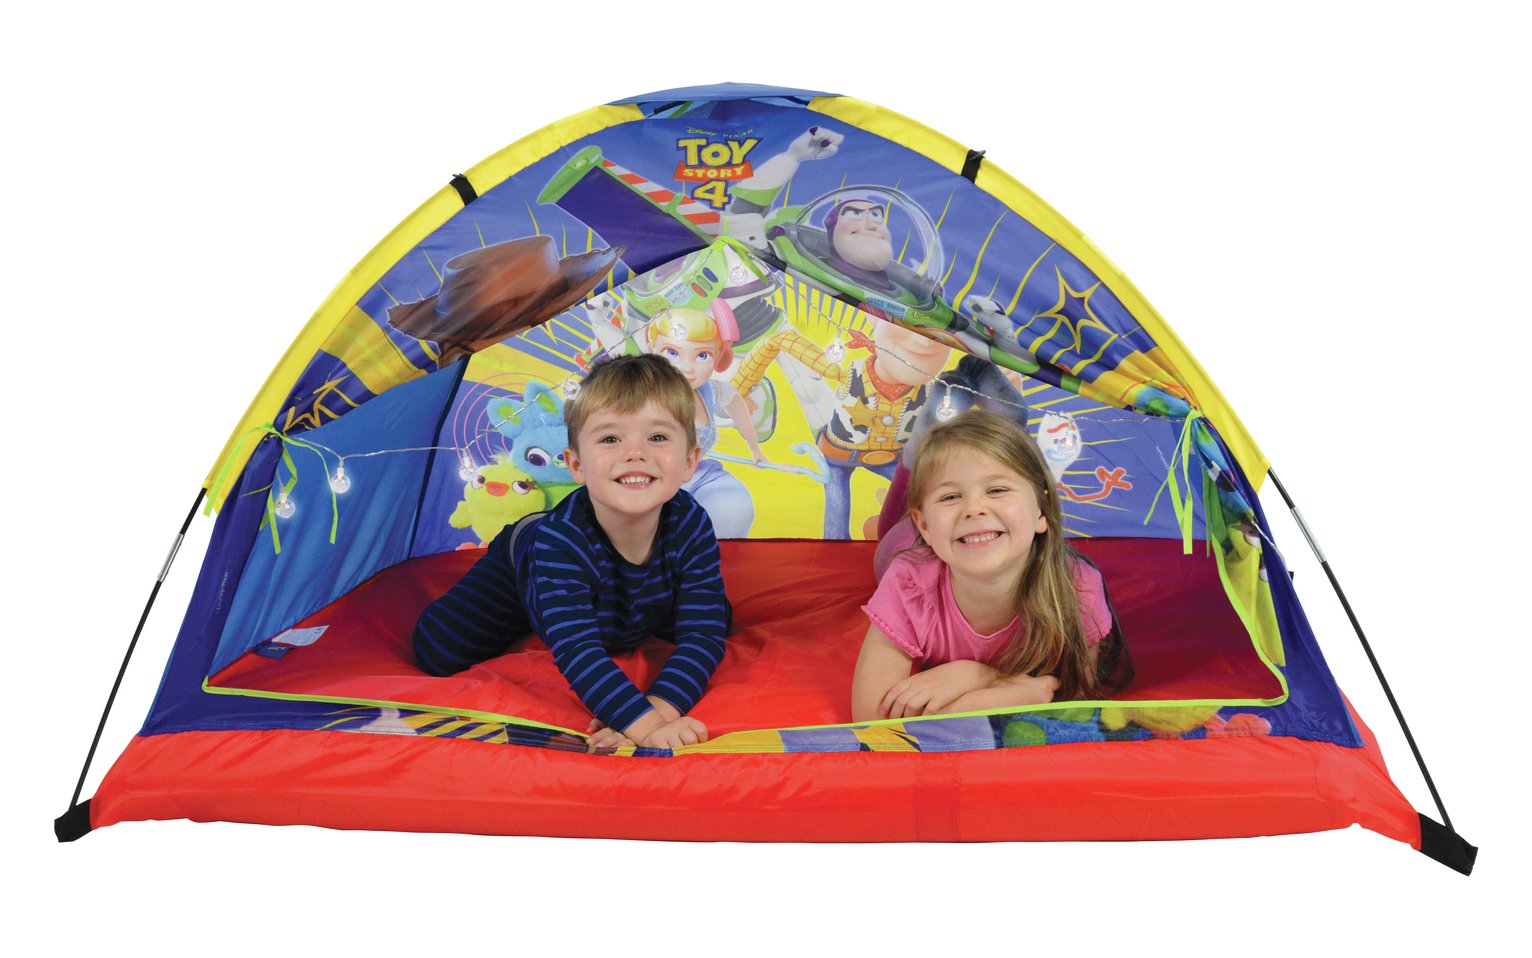 Disney Toy Story 4 My Dream Den Kids Play Tent with Lights Review